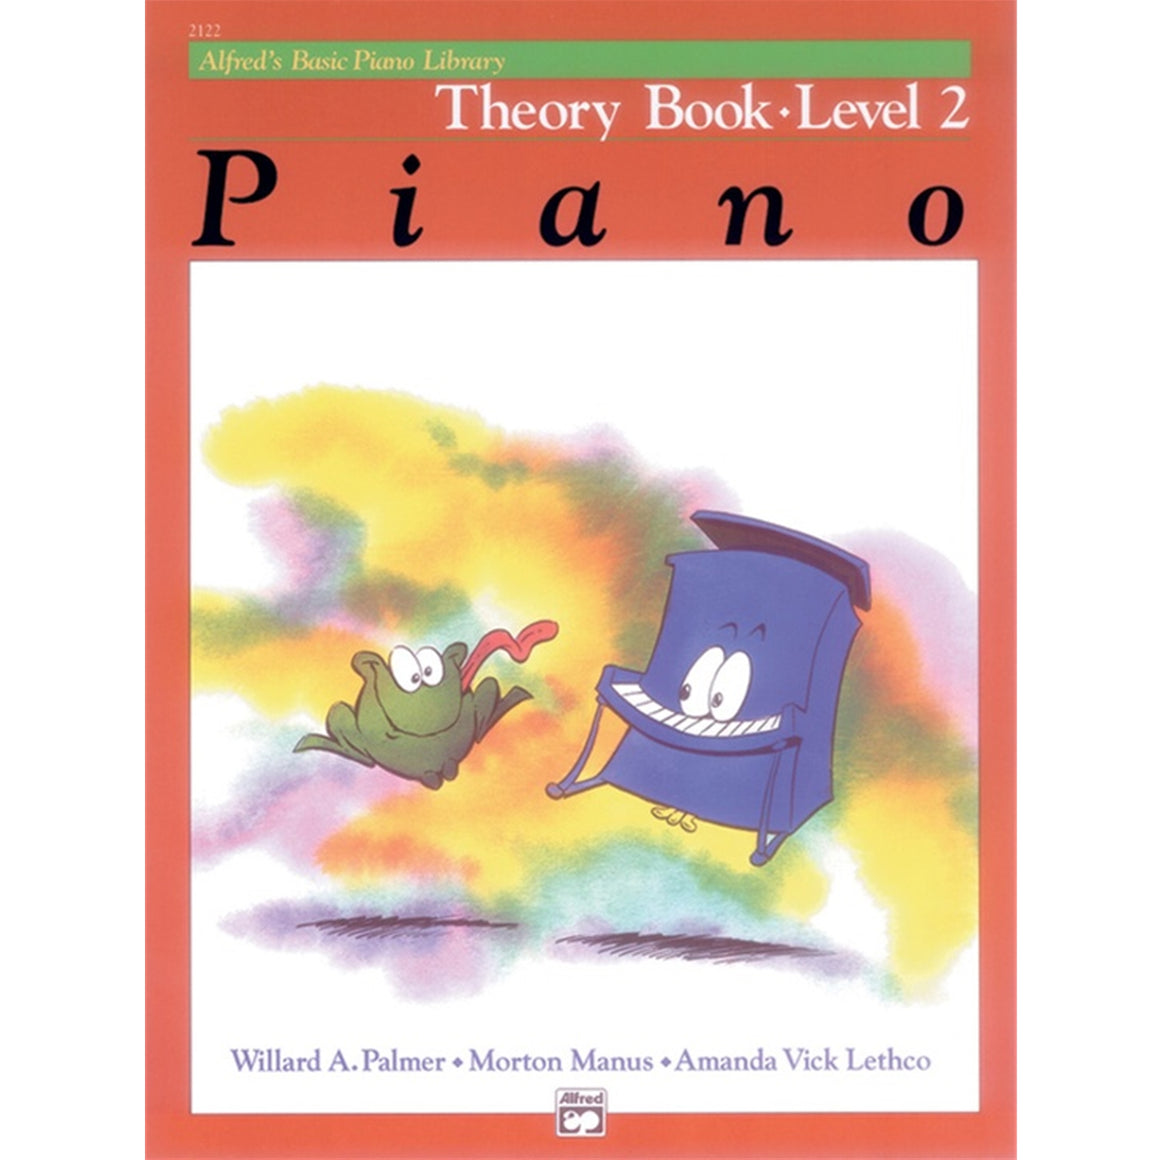 ALFRED 2122 Alfred's Basic Piano Course: Theory Book 2 [Piano]